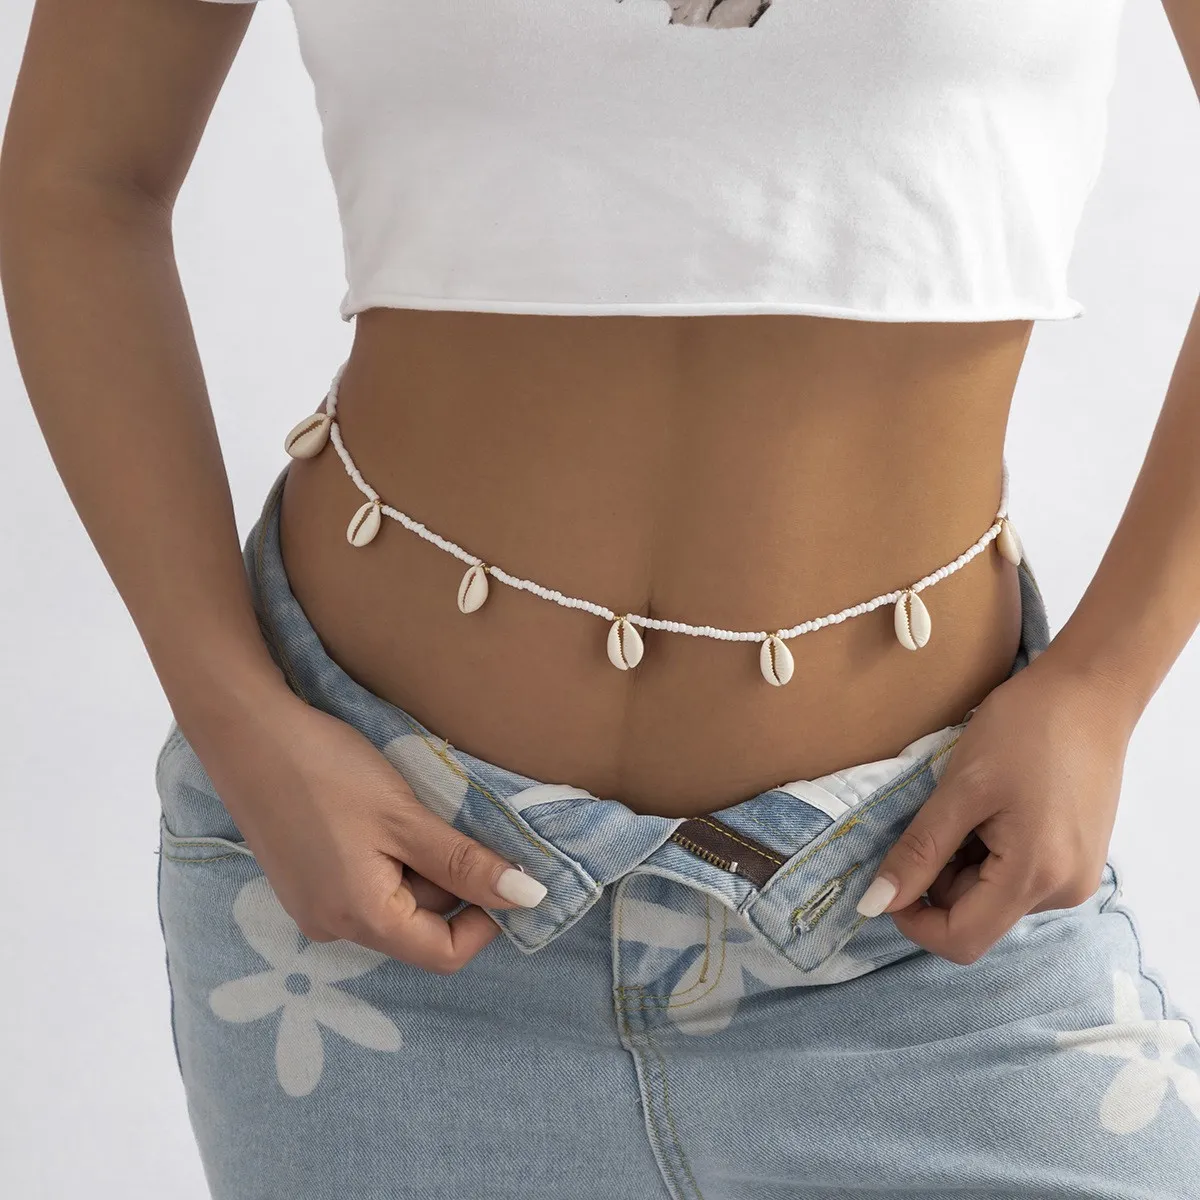 Belly Chains Mti Layer Fl Female Body Chain Harness Shiny Y Accessories Gold Color Women Fashion Waist Jewelry Factory Price Expert D Ot6Dx